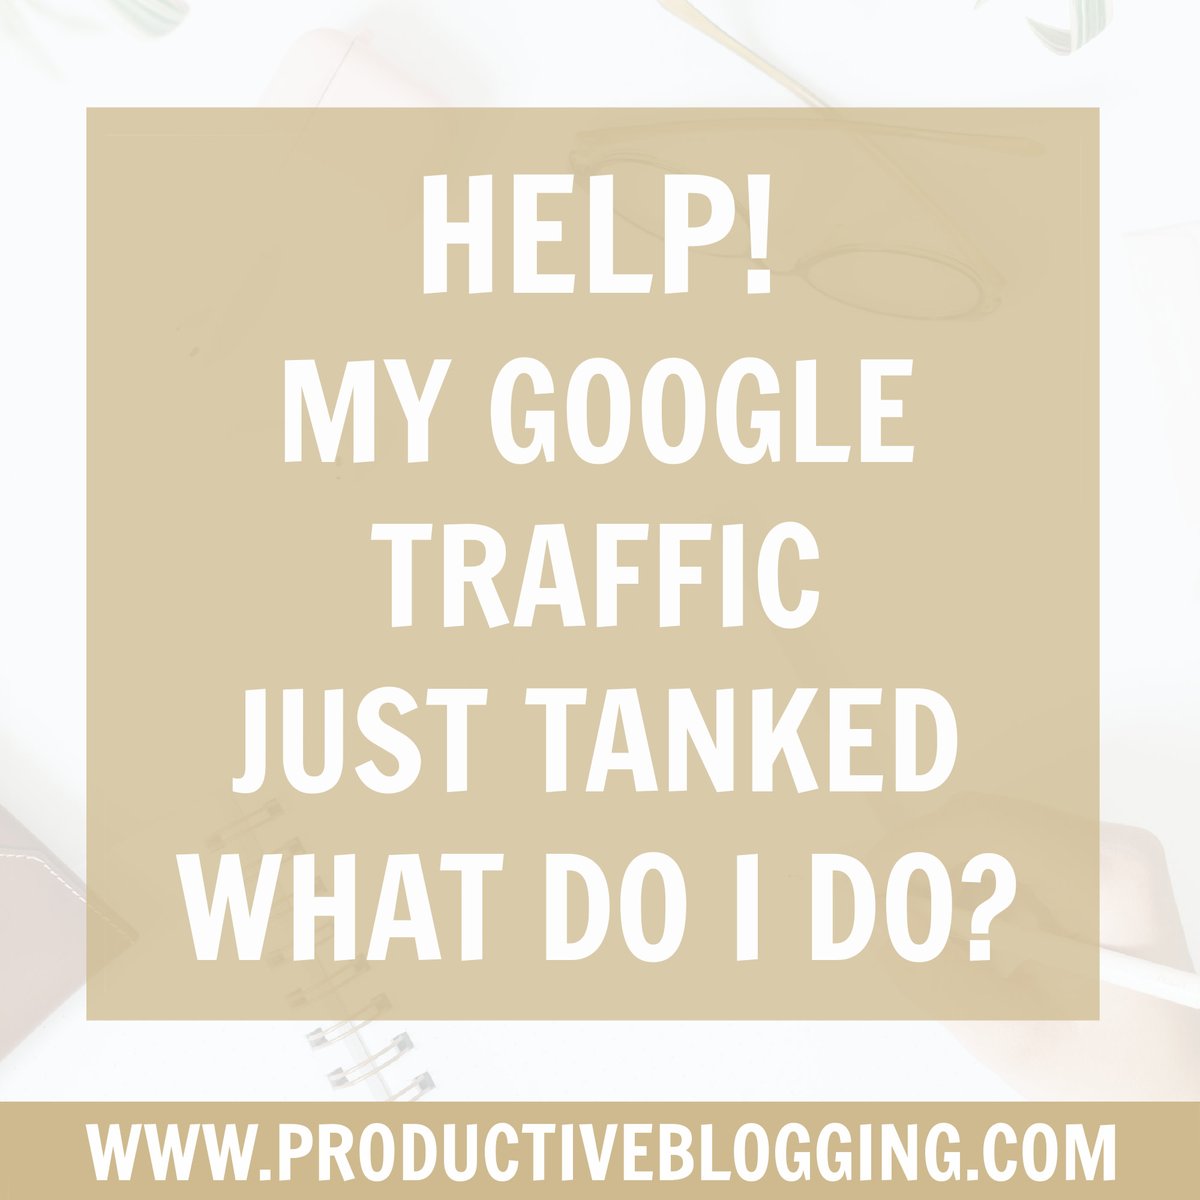 Freaking out right now because your Google traffic has just taken a nosedive?? Take a deep calming breath and then read my step-by-step guide on exactly what to do if your Google traffic suddenly drops >>> bit.ly/3eJXI5I

#seotips #bloggingtips #productiveblogging